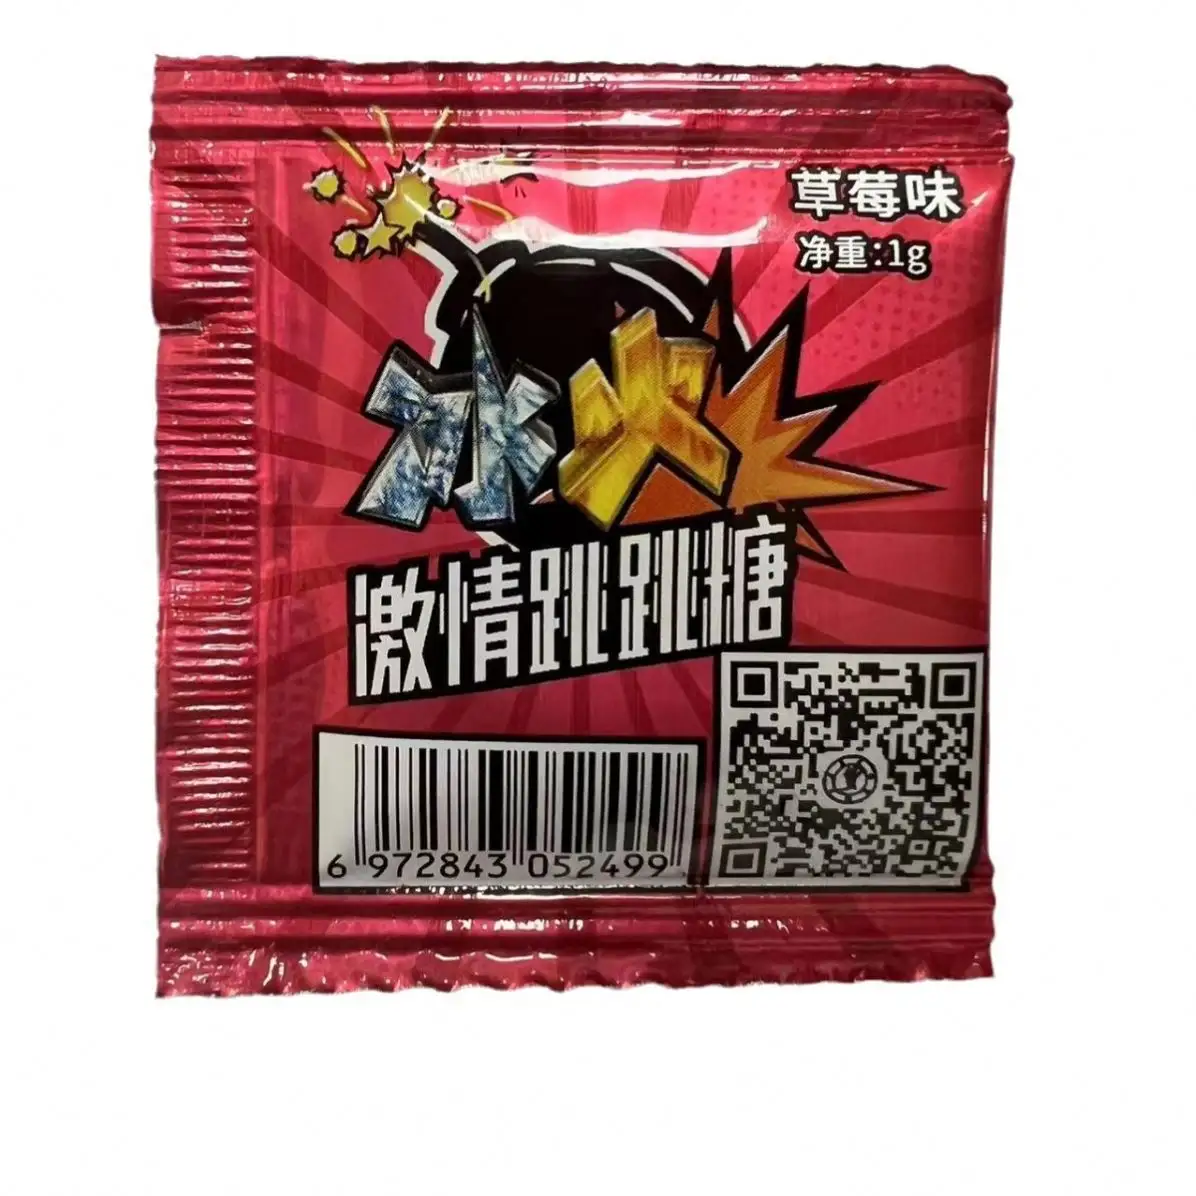 B101803 1G Hot Strawberry Cool Mint Oral Sex Sugar For Sex